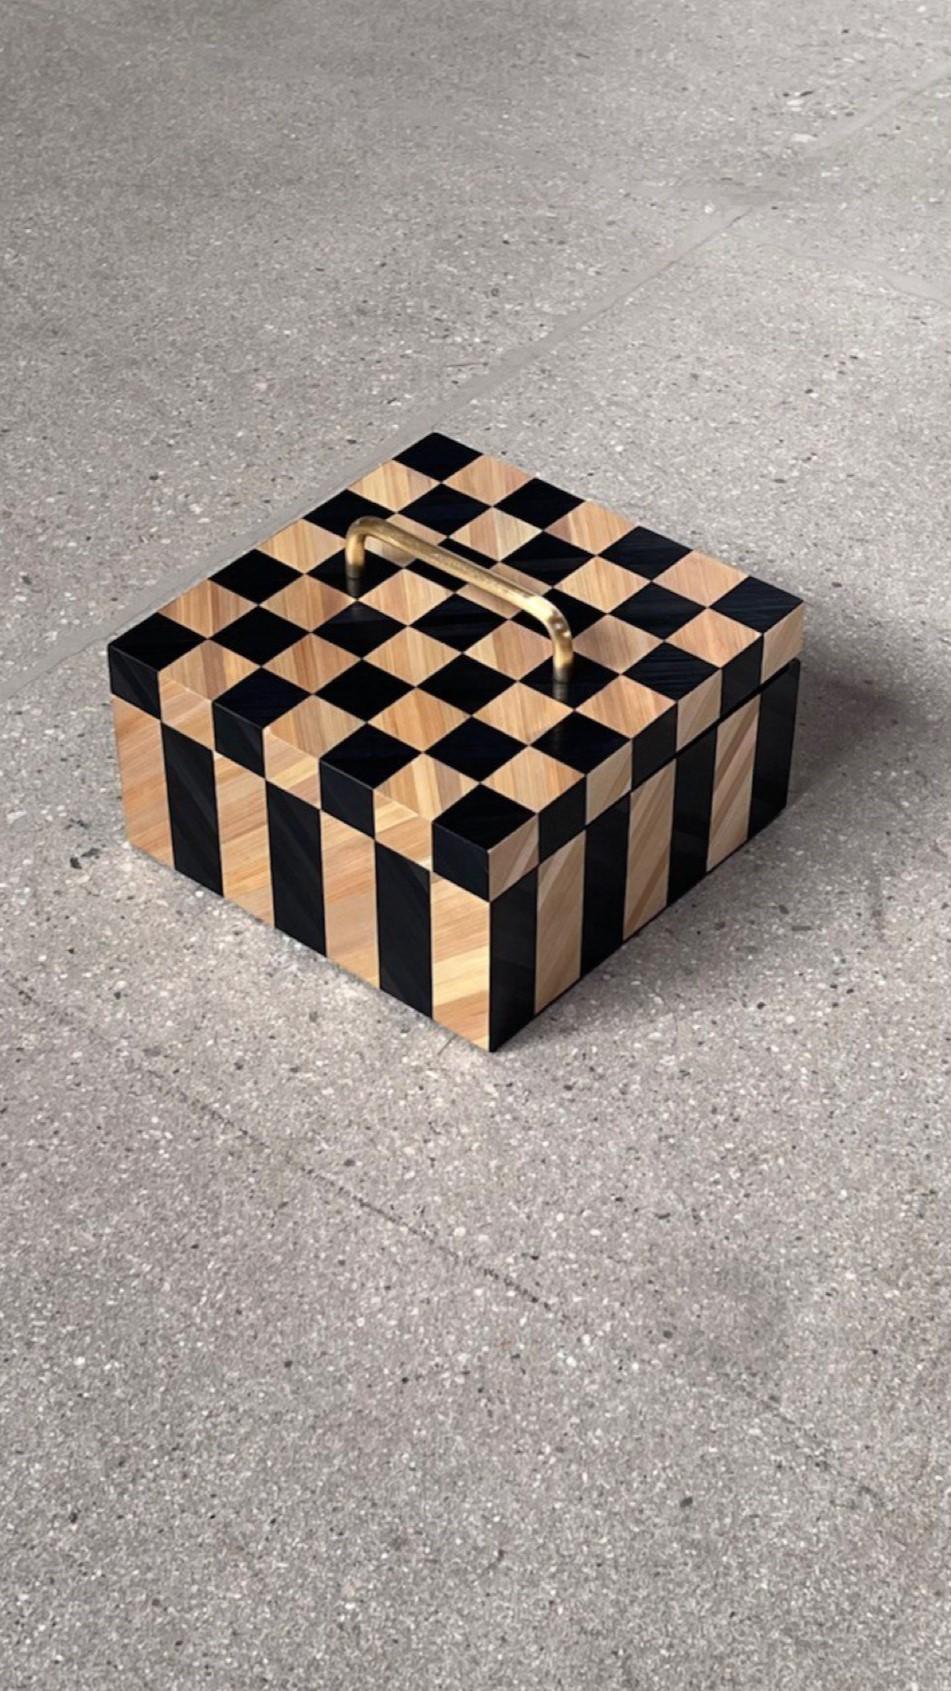 DECORATIVE BOX 01
Inlay scheme: Weave
Colour scheme: Ruta
Available in individuals colors
MATERIALS: MDF, painted rye straw, brass.
DIMENSIONS (cm):20x20x10,5.
Packaging dimensions (cm): 22 x 22 x 12.
Weight: 3 kg
Lead time: 4 weeks.